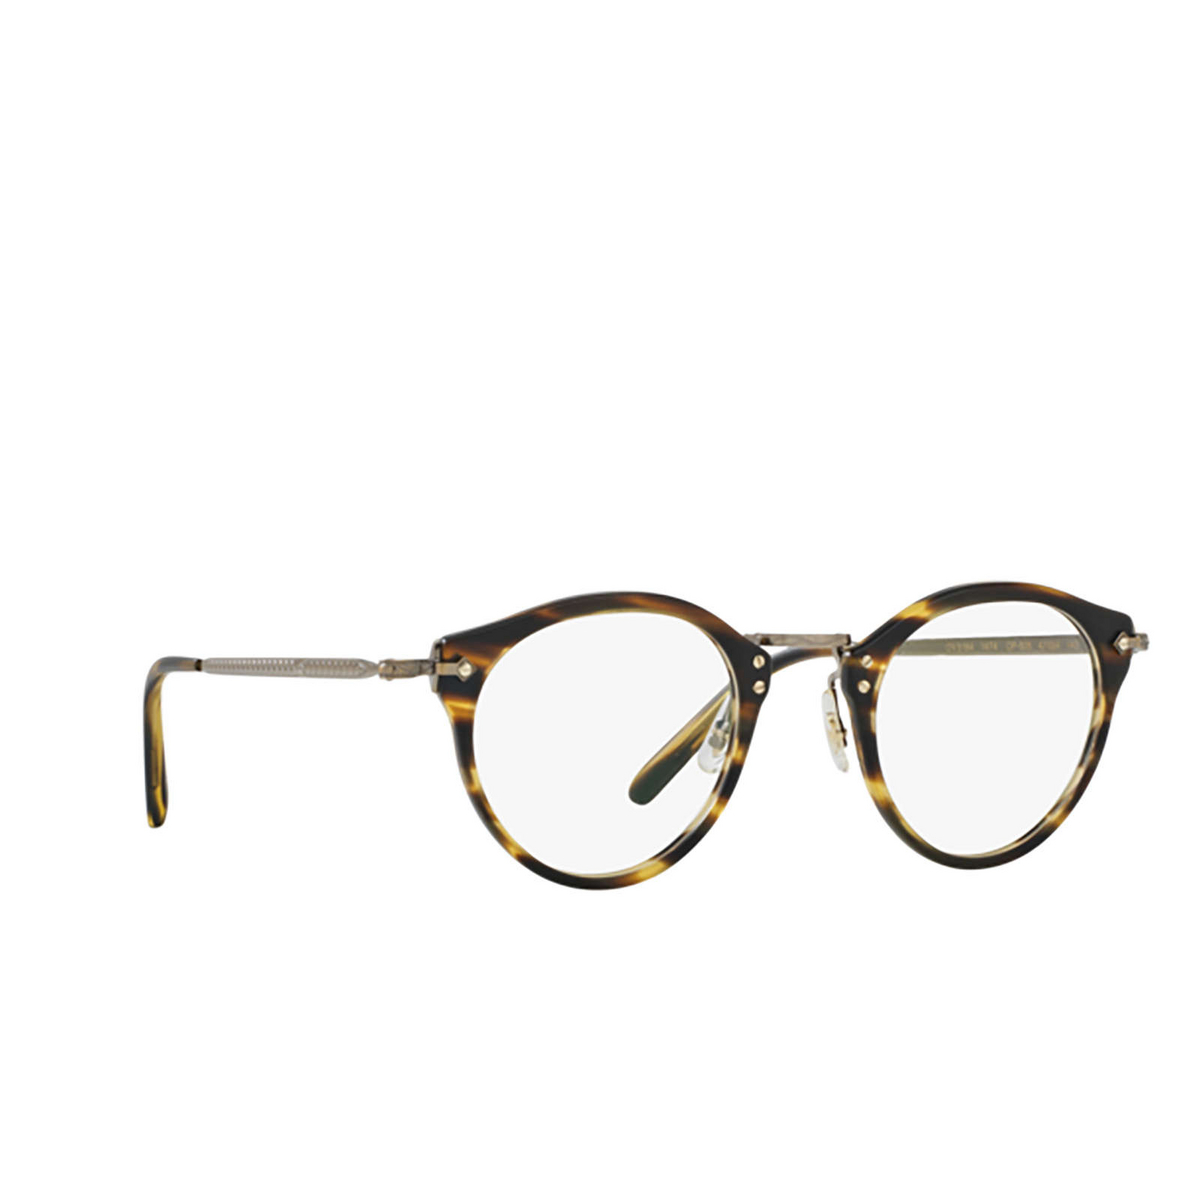 Oliver Peoples OP-505 Eyeglasses 1474 Semi Matte Cocobolo - three-quarters view